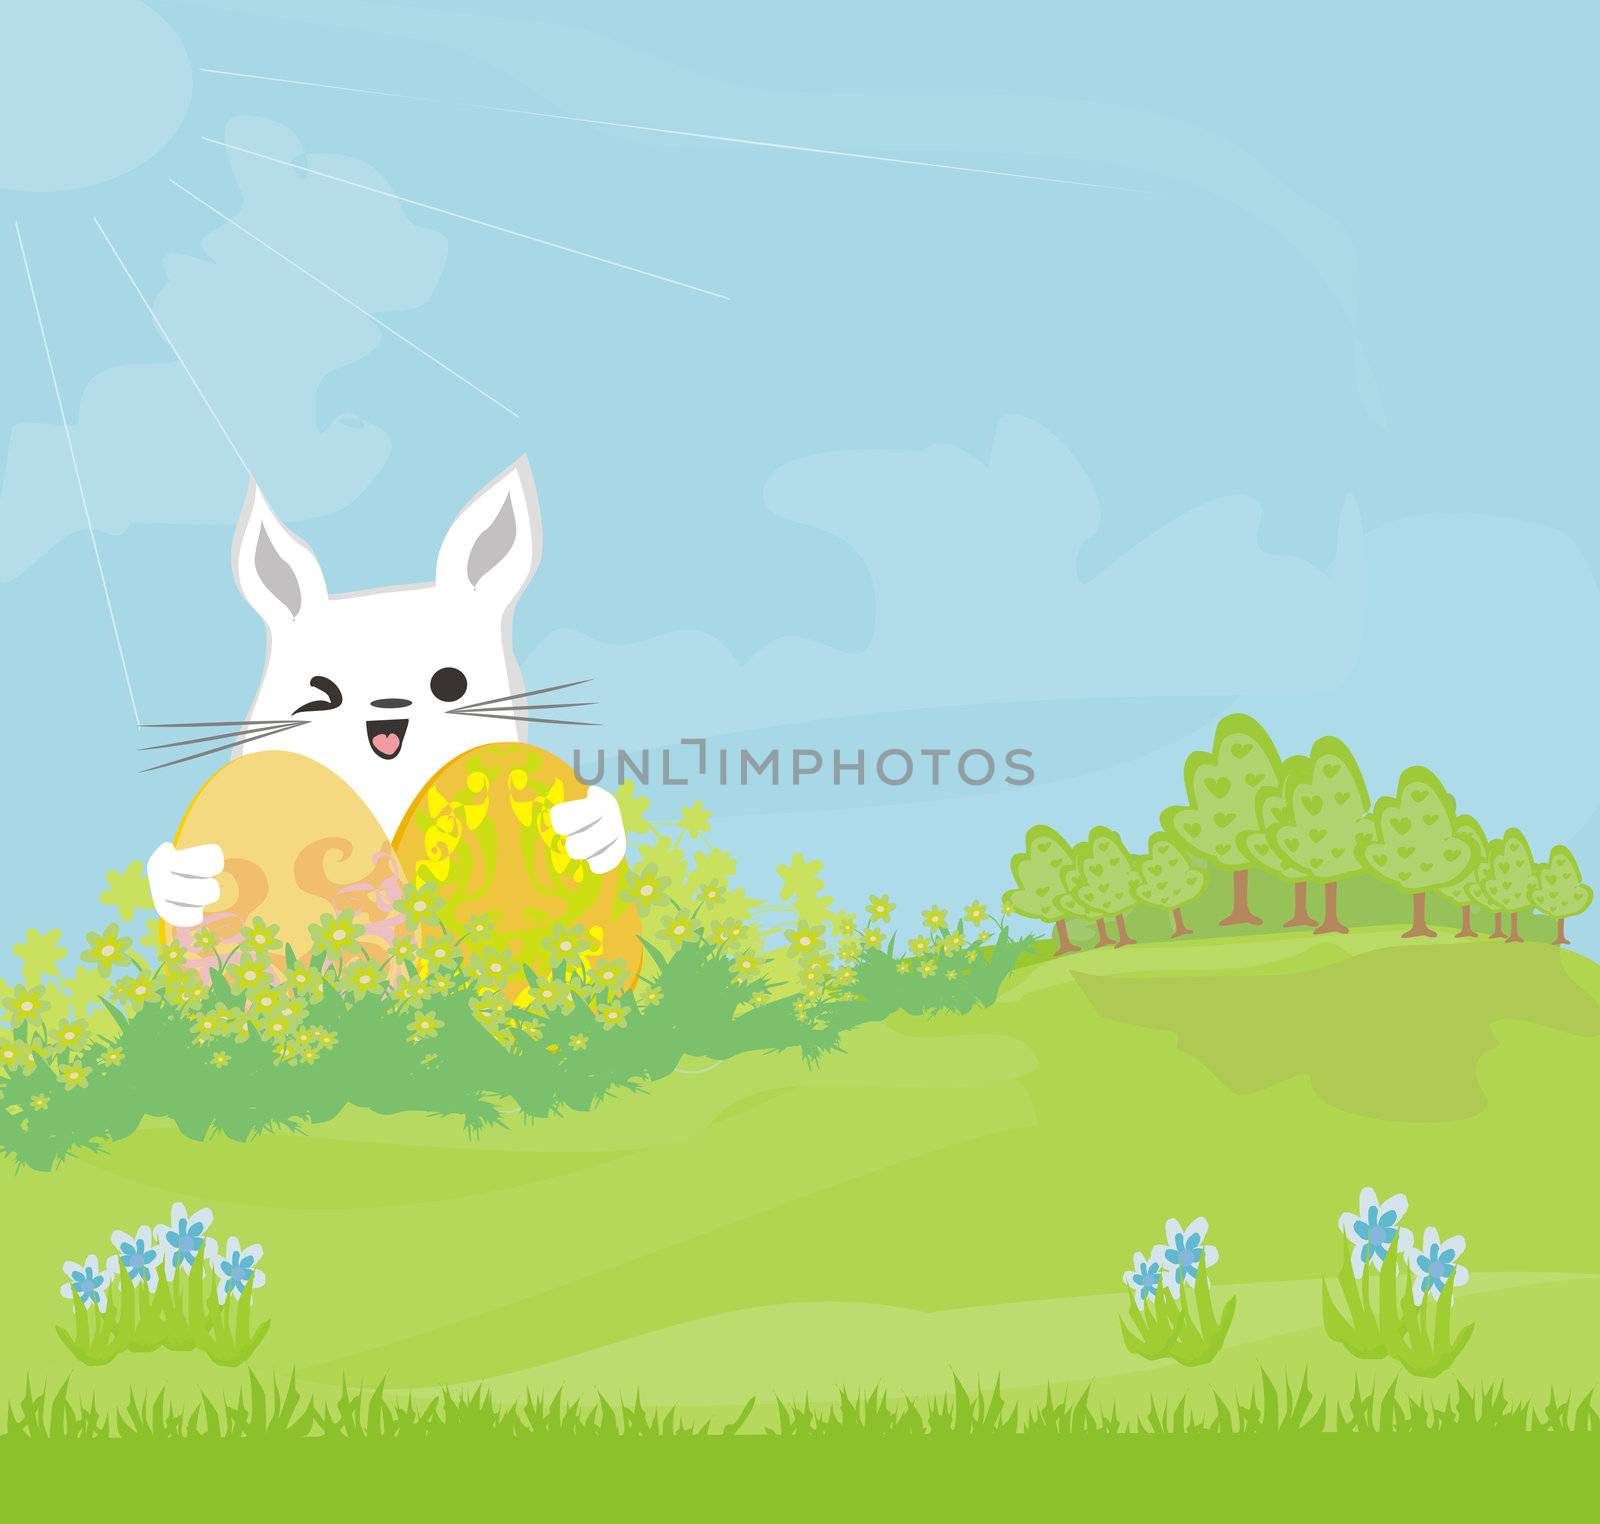 Illustration of happy Easter bunny carrying egg by JackyBrown